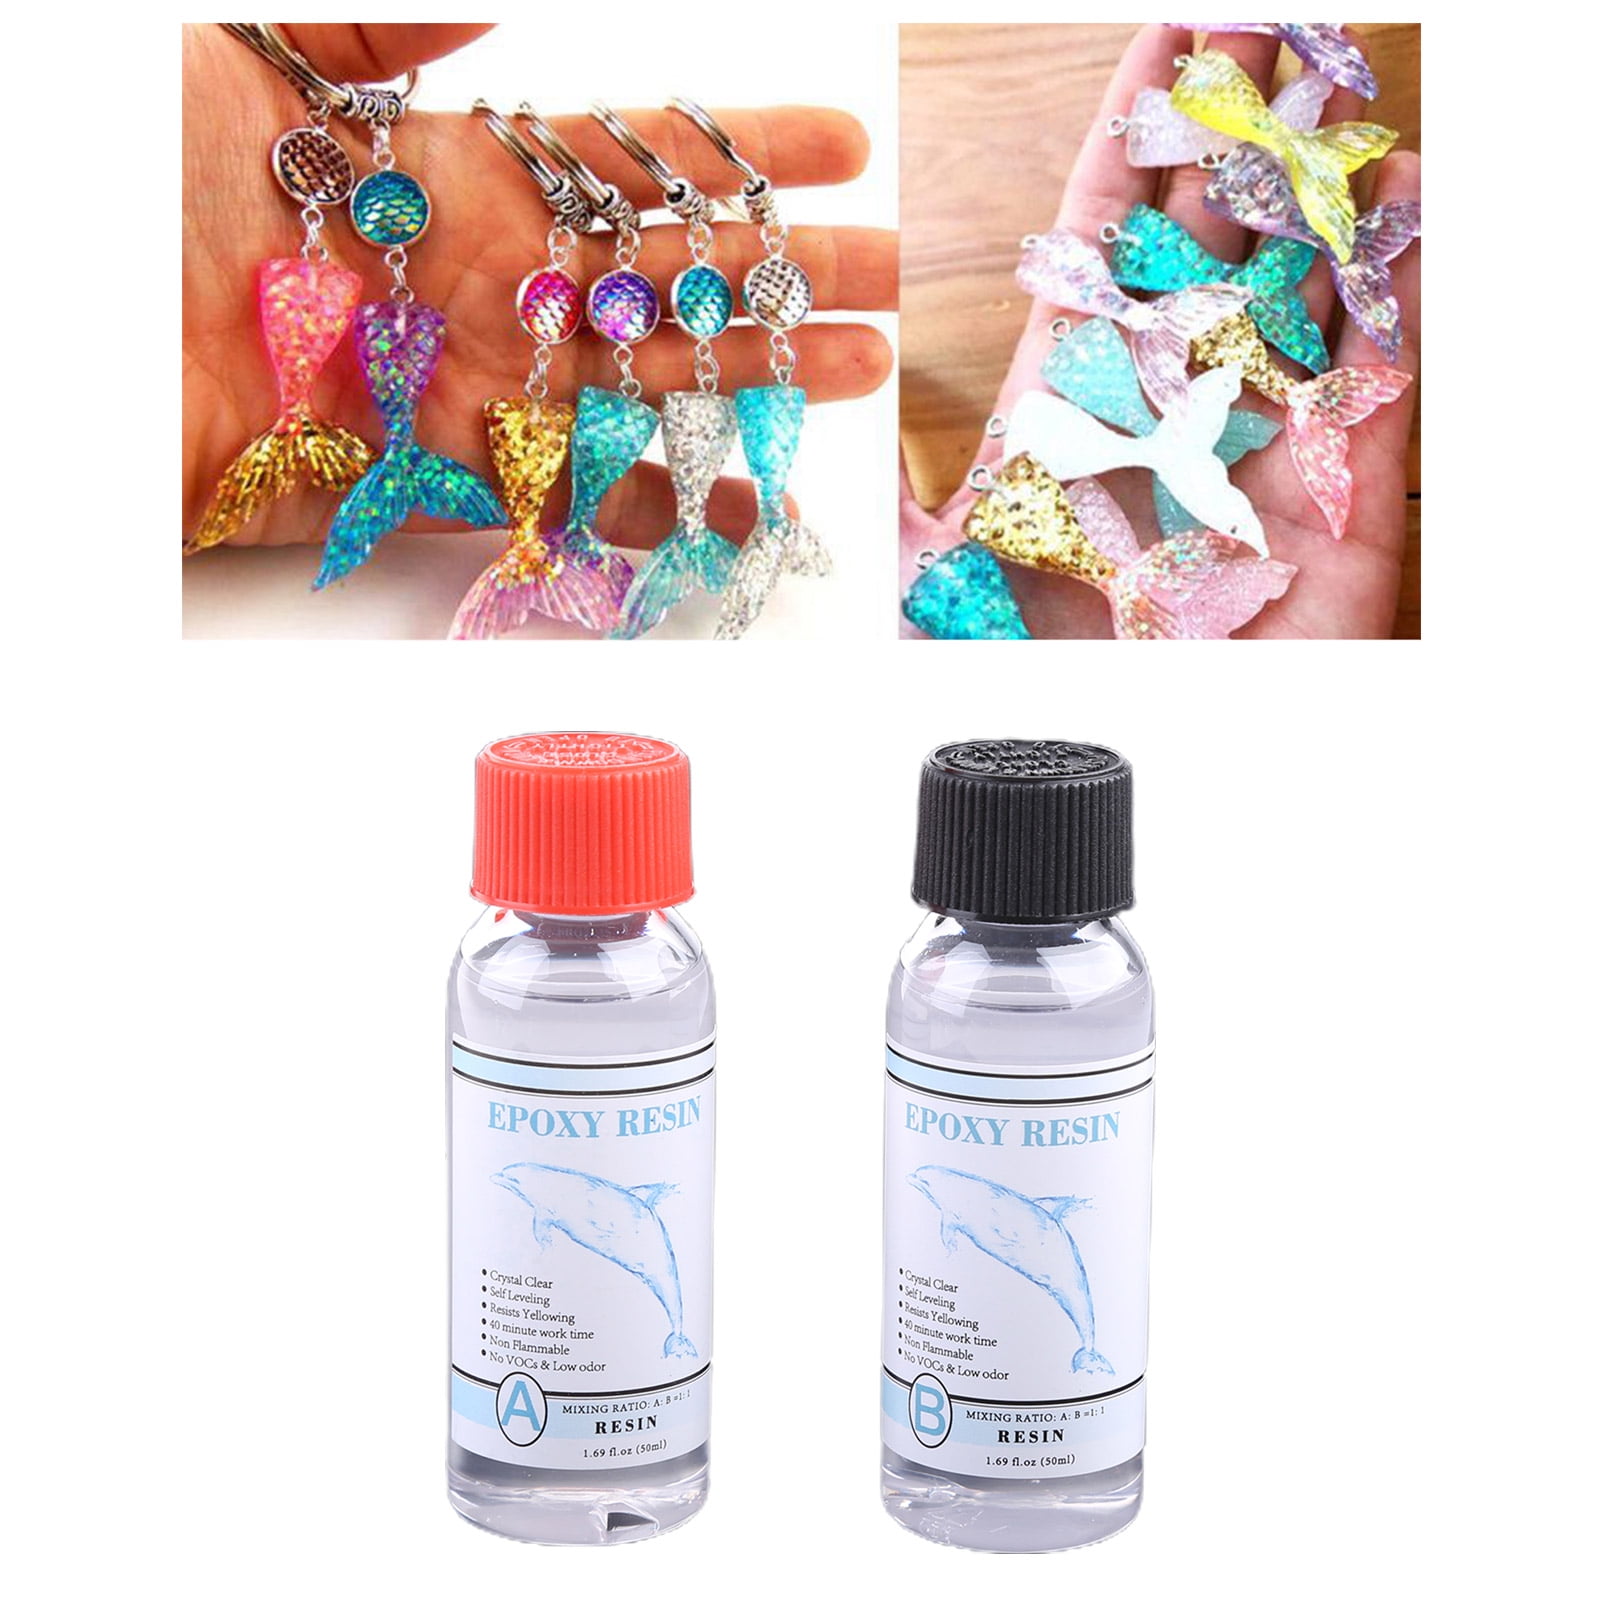 25/60/100/200g Hard Type Solar Ultraviolet Solidify Cure Resin UV Resin  Glue Clear Gel Activated Crafts For DIY Jewelry Mold - AliExpress